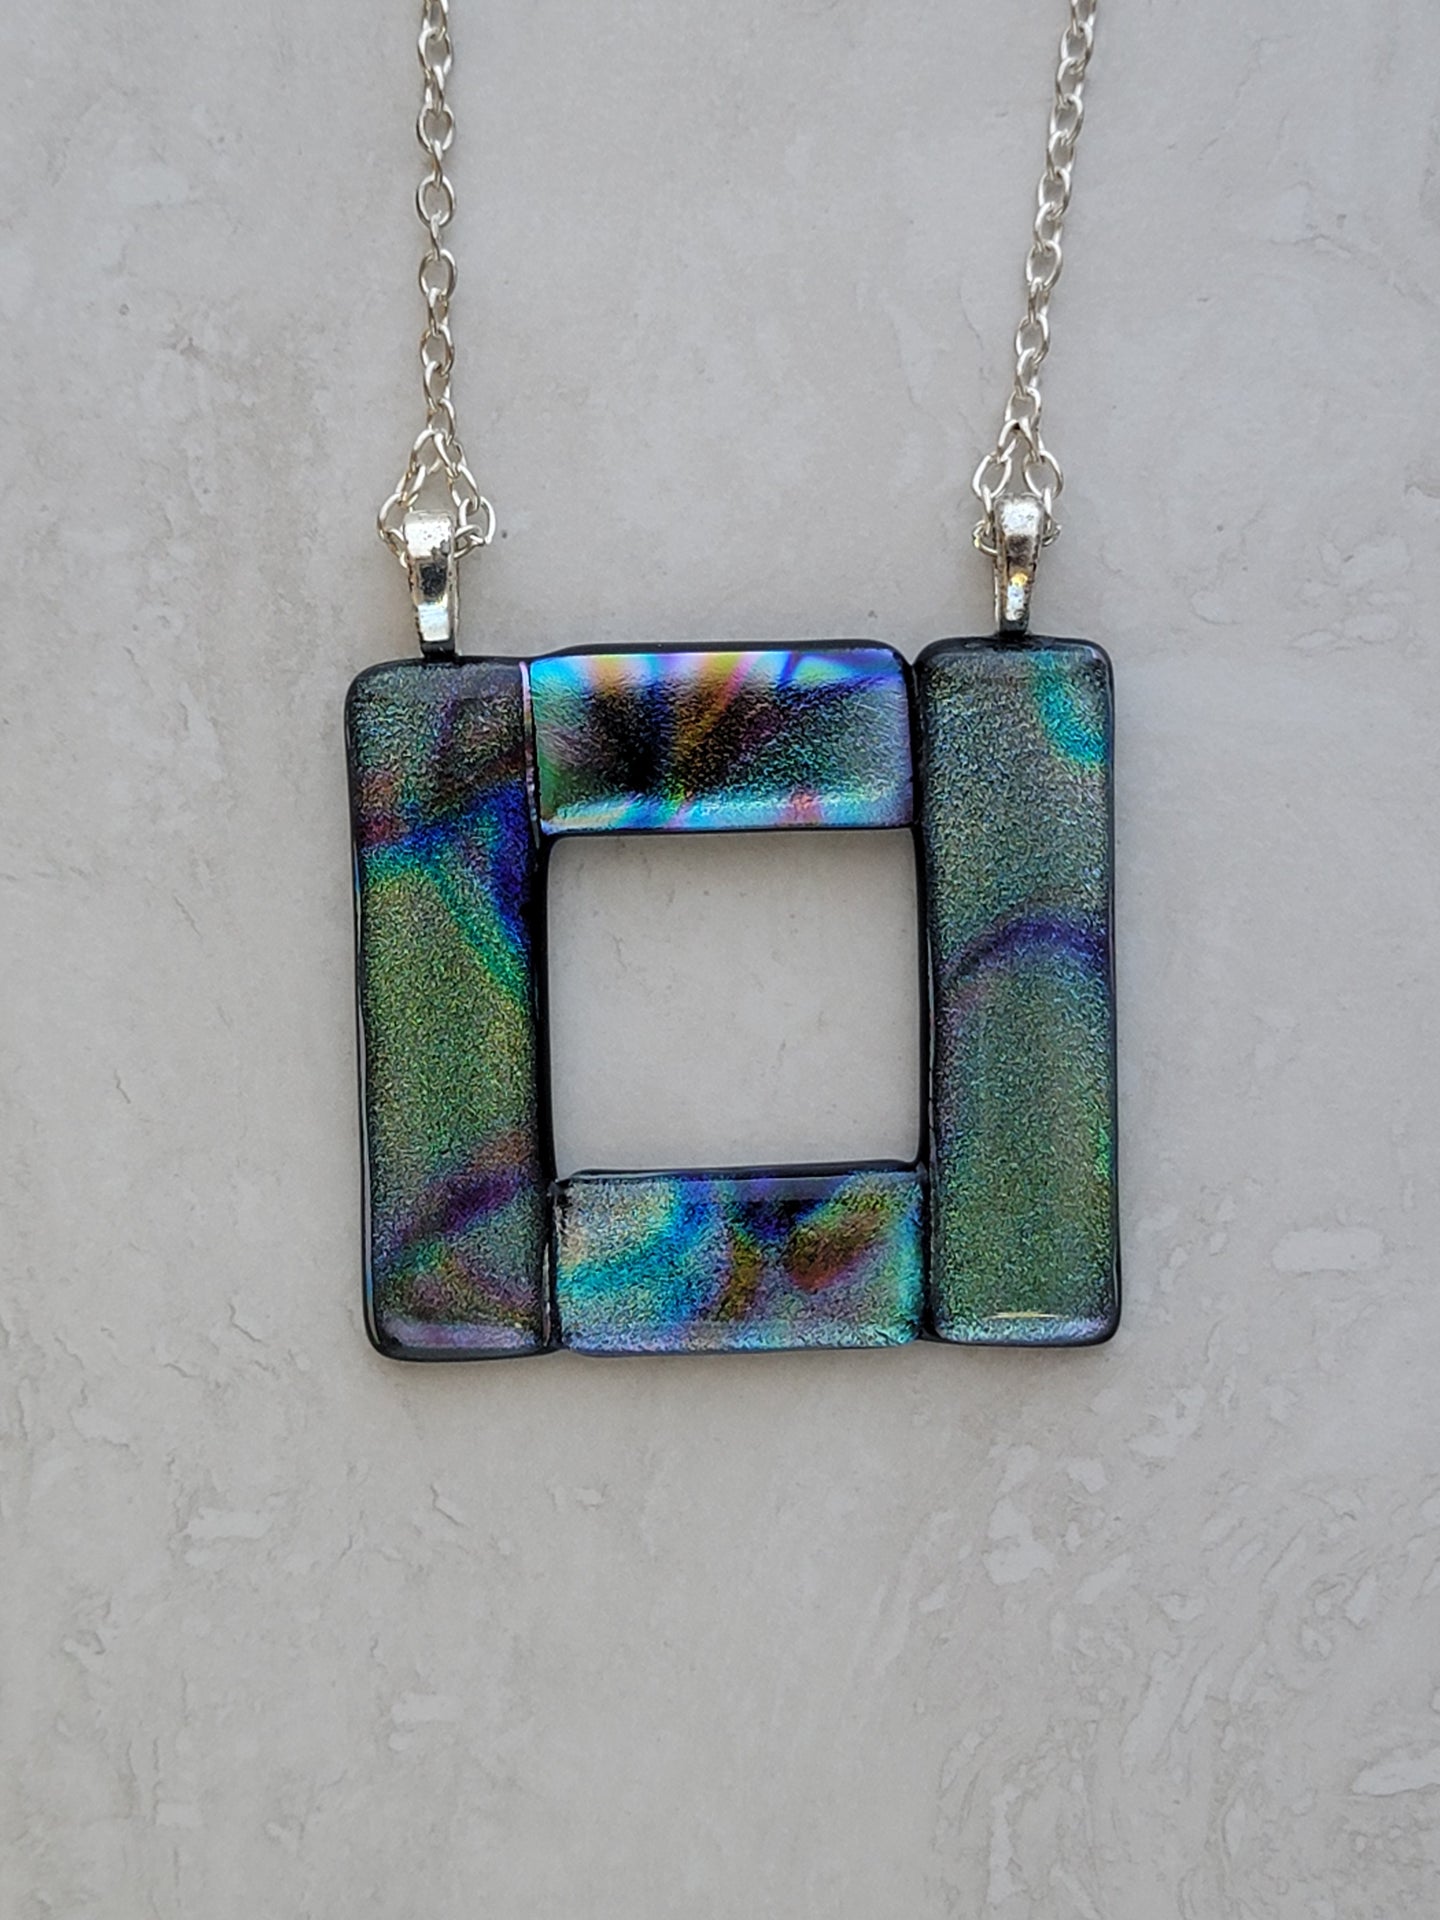 Square Dichroic Fused Glass Pendant Necklace - Rainbow Of Colors - Silver Plated Chain & Clasp - Handmade Pendant by KM - One Of A Kind Necklace